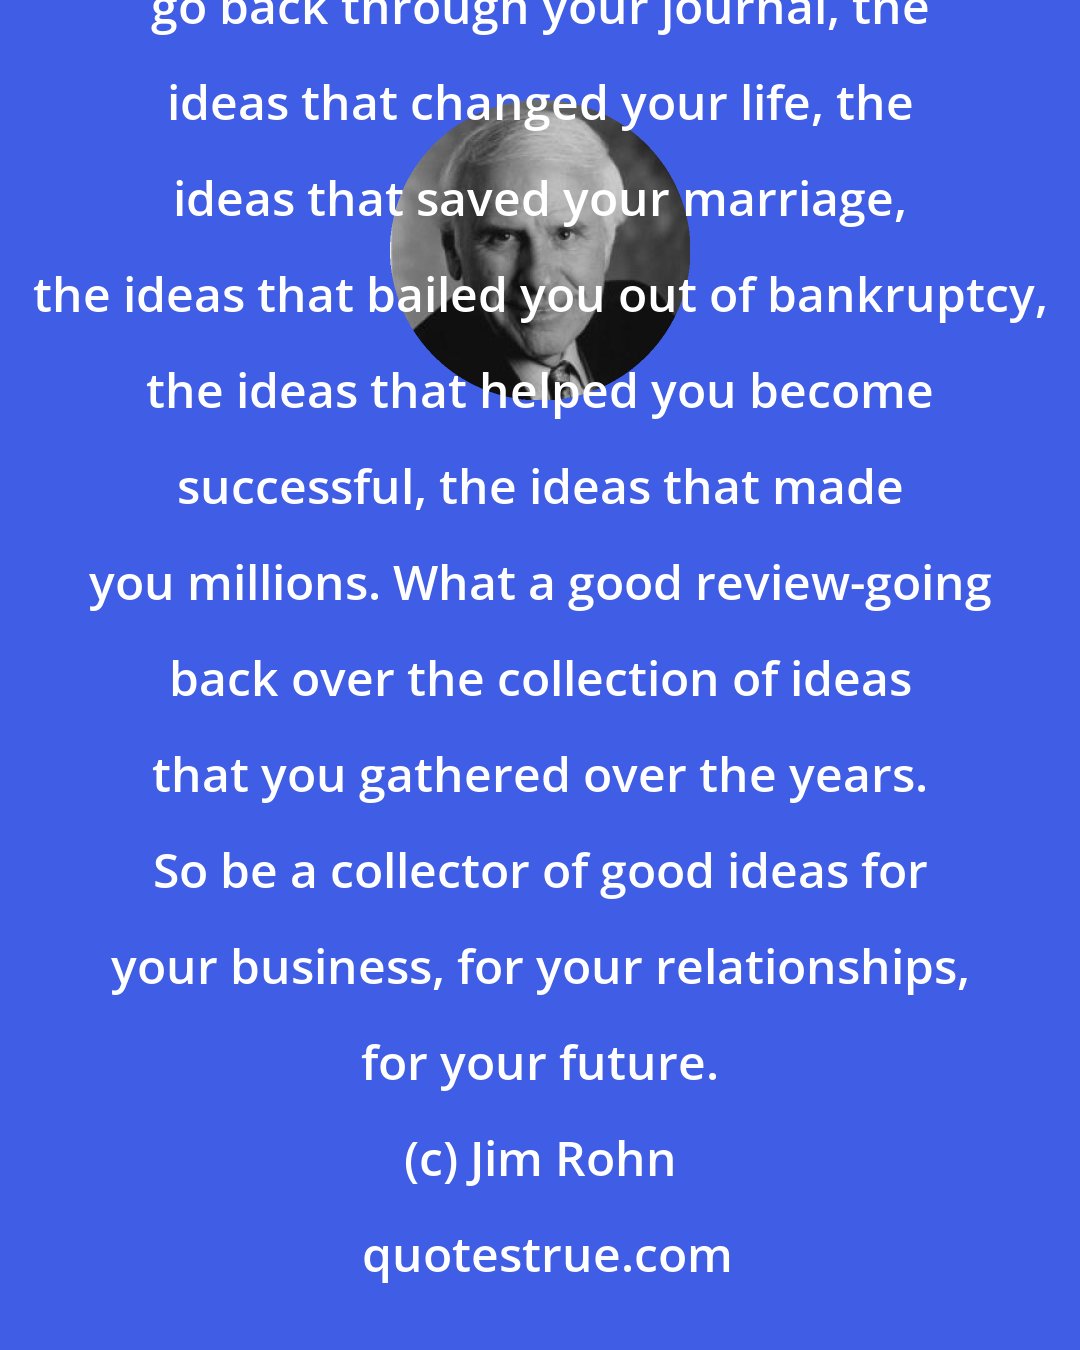 Jim Rohn: If you hear a good idea, capture it; write it down. Don't trust your memory. Then on a cold wintry evening, go back through your journal, the ideas that changed your life, the ideas that saved your marriage, the ideas that bailed you out of bankruptcy, the ideas that helped you become successful, the ideas that made you millions. What a good review-going back over the collection of ideas that you gathered over the years. So be a collector of good ideas for your business, for your relationships, for your future.